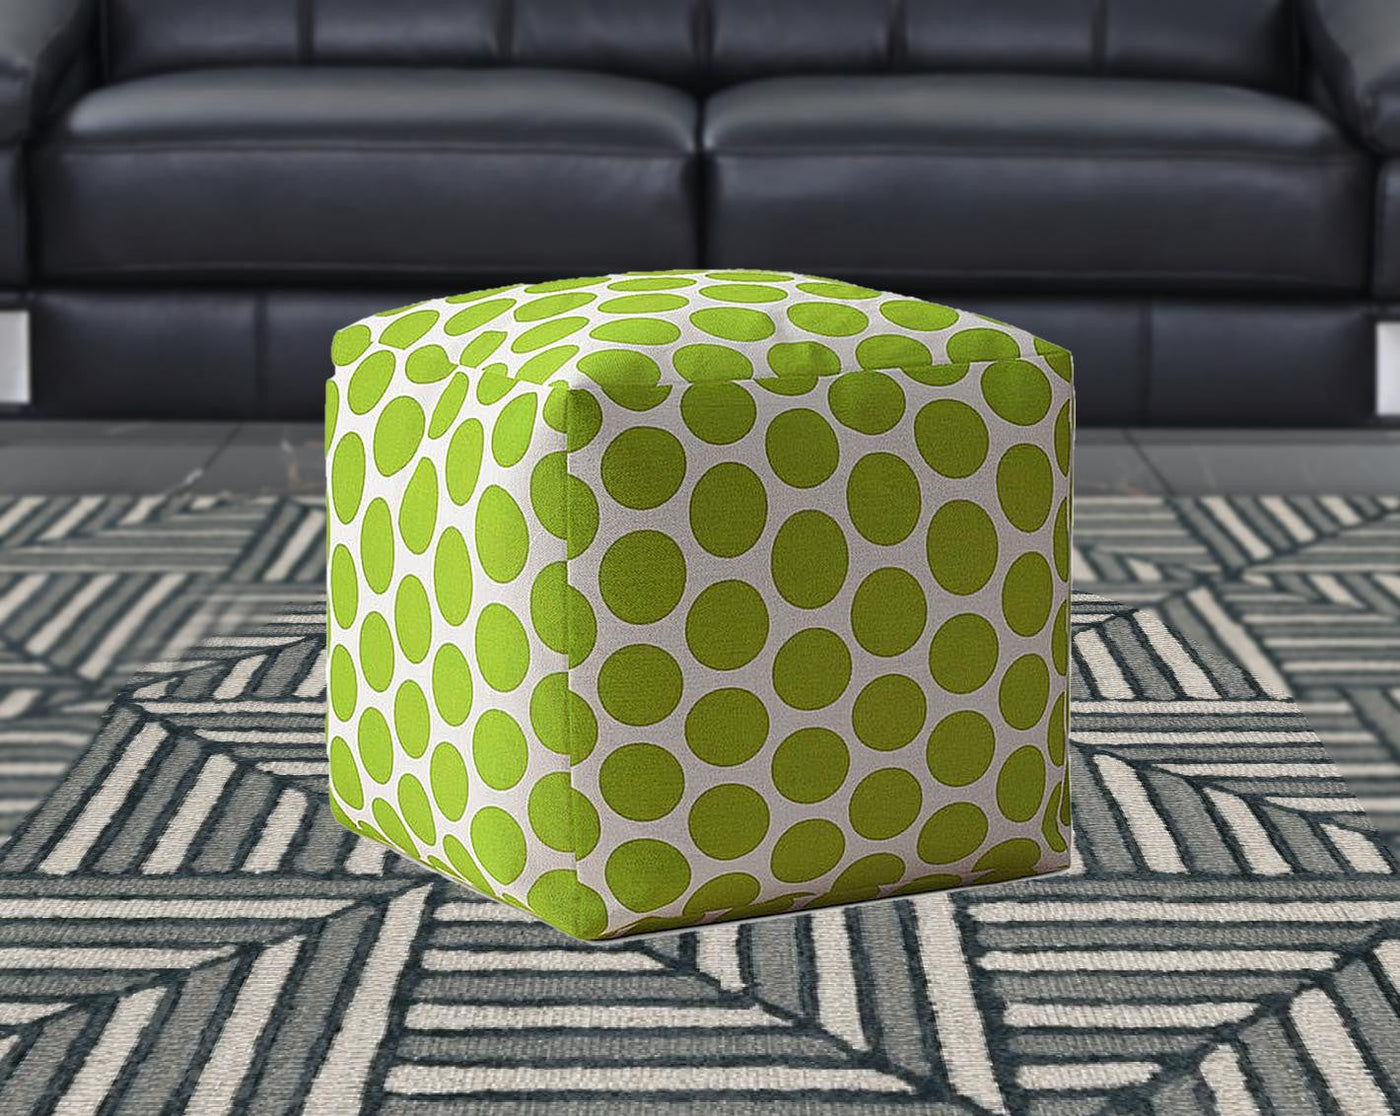 17’ Green And White Cotton Polka Dots Pouf Cover - Ottomans